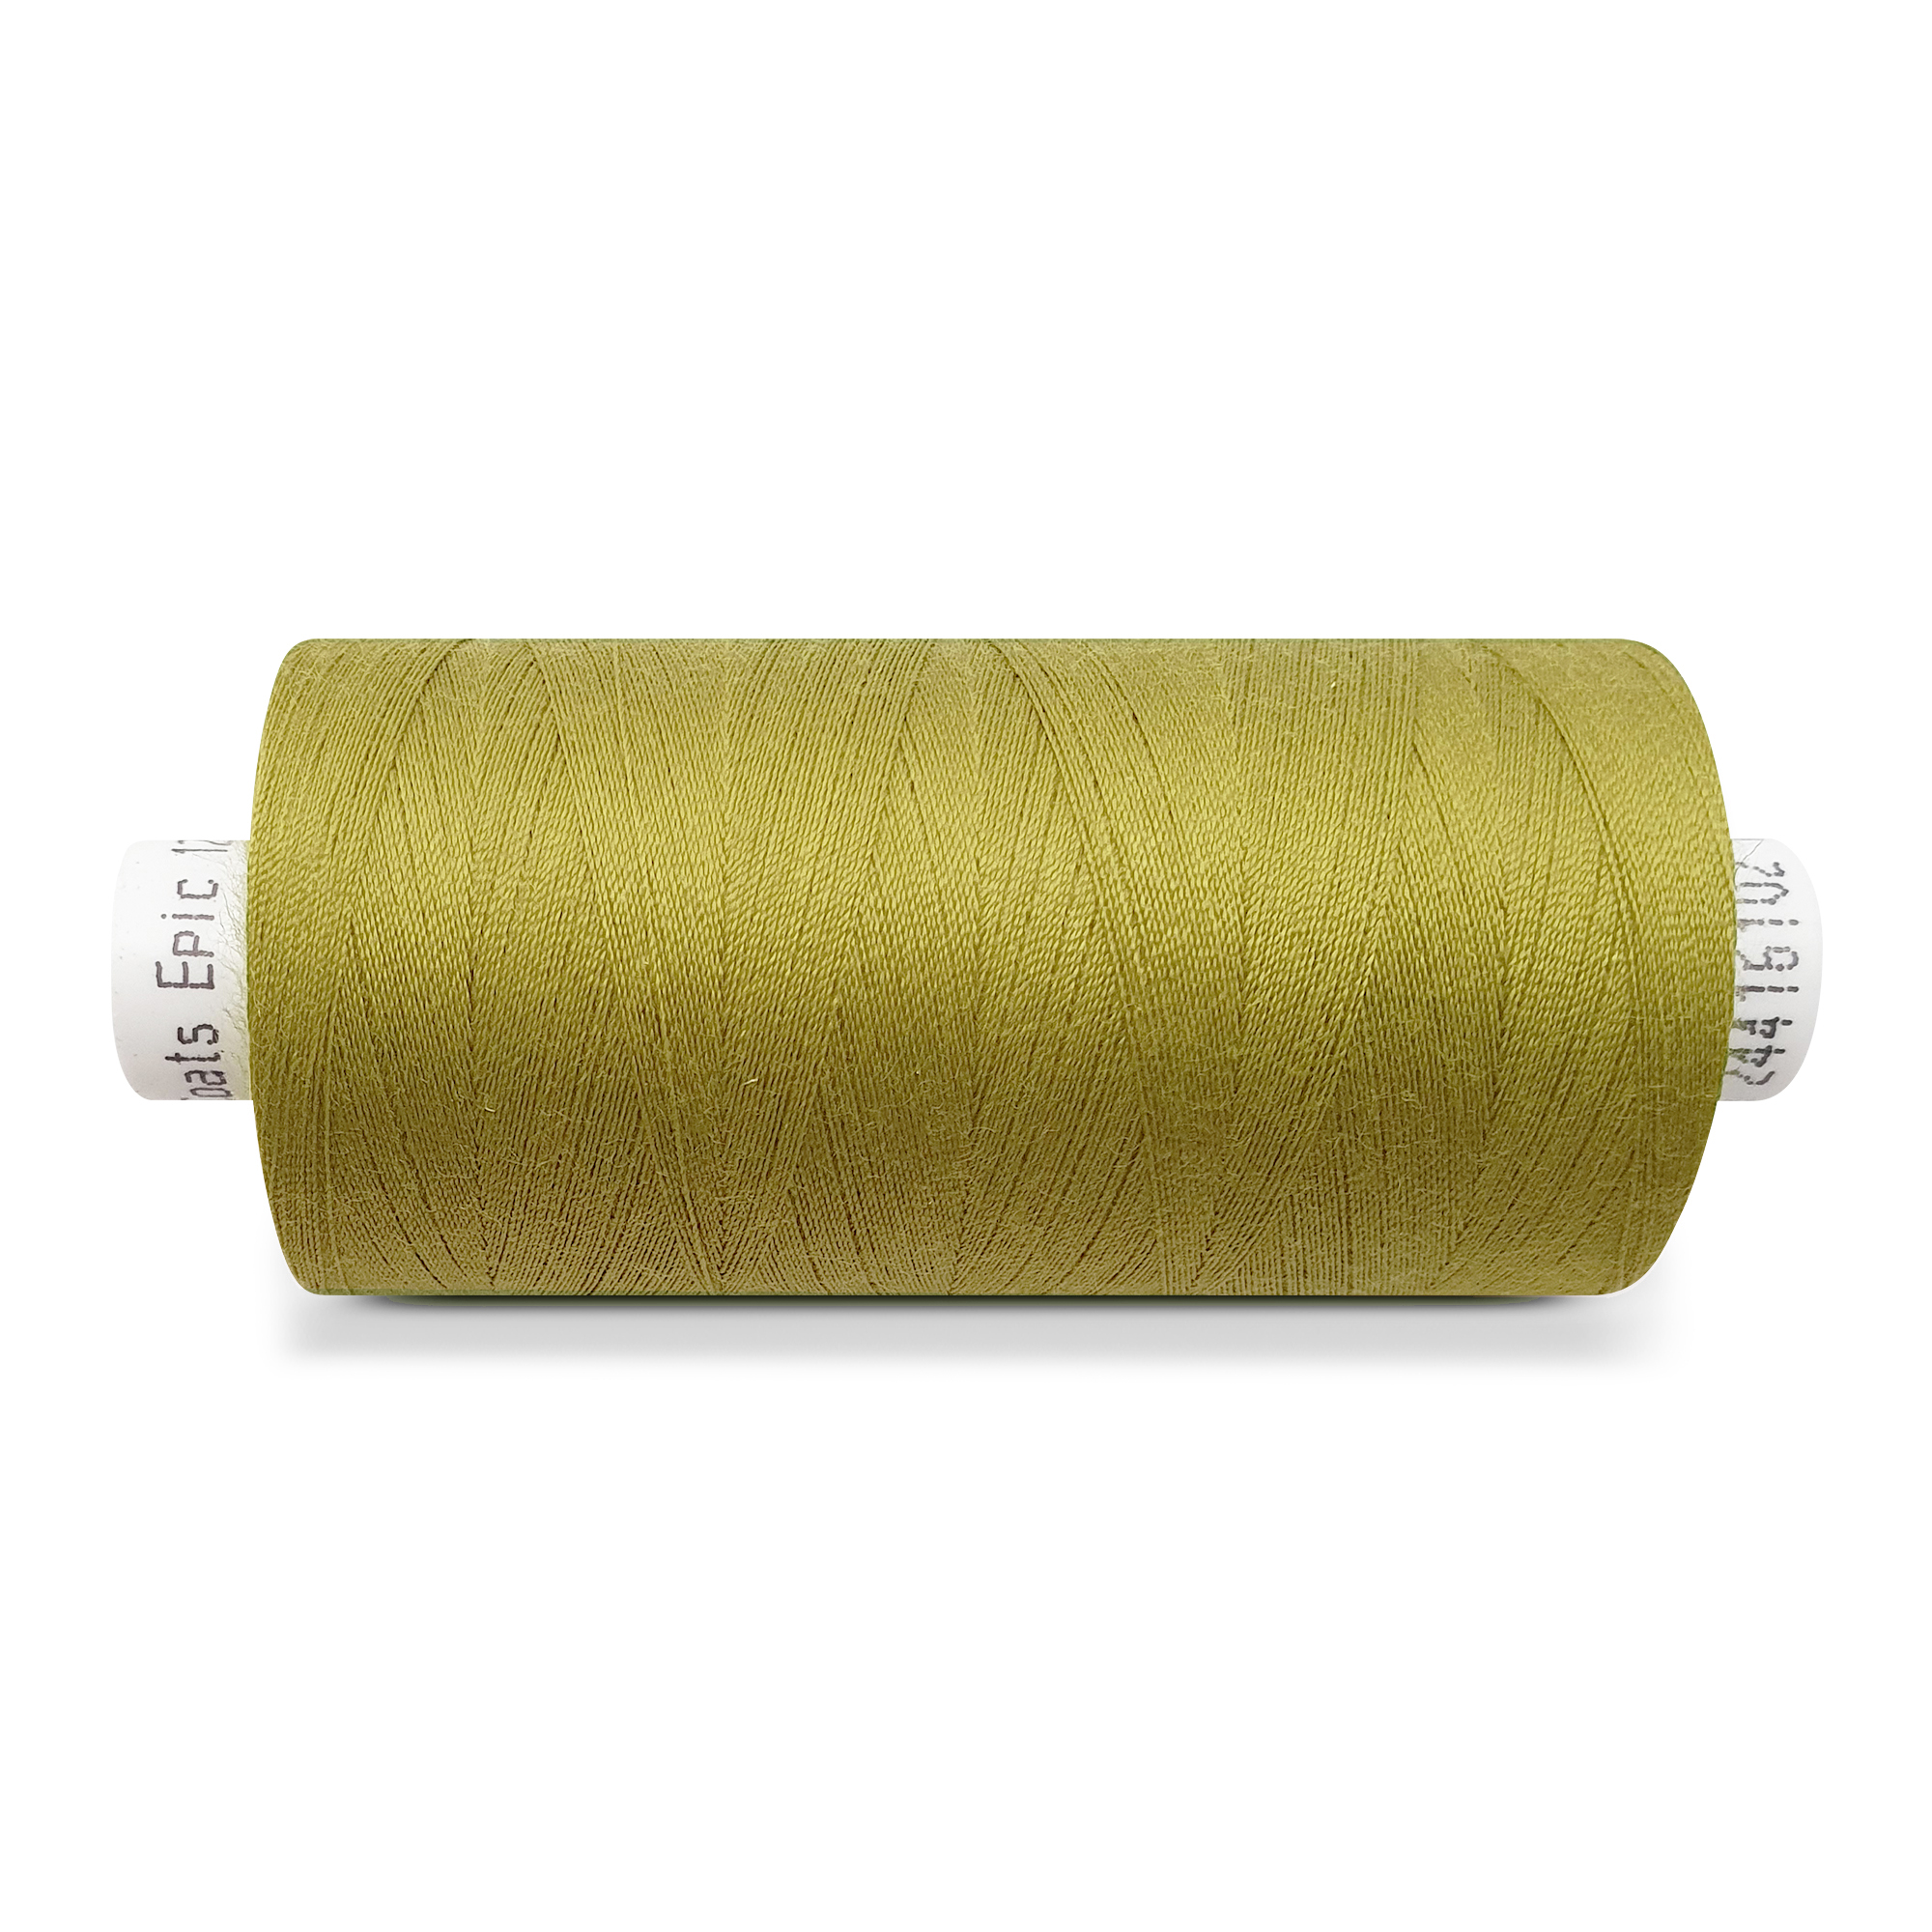 Sewing thread french mustard